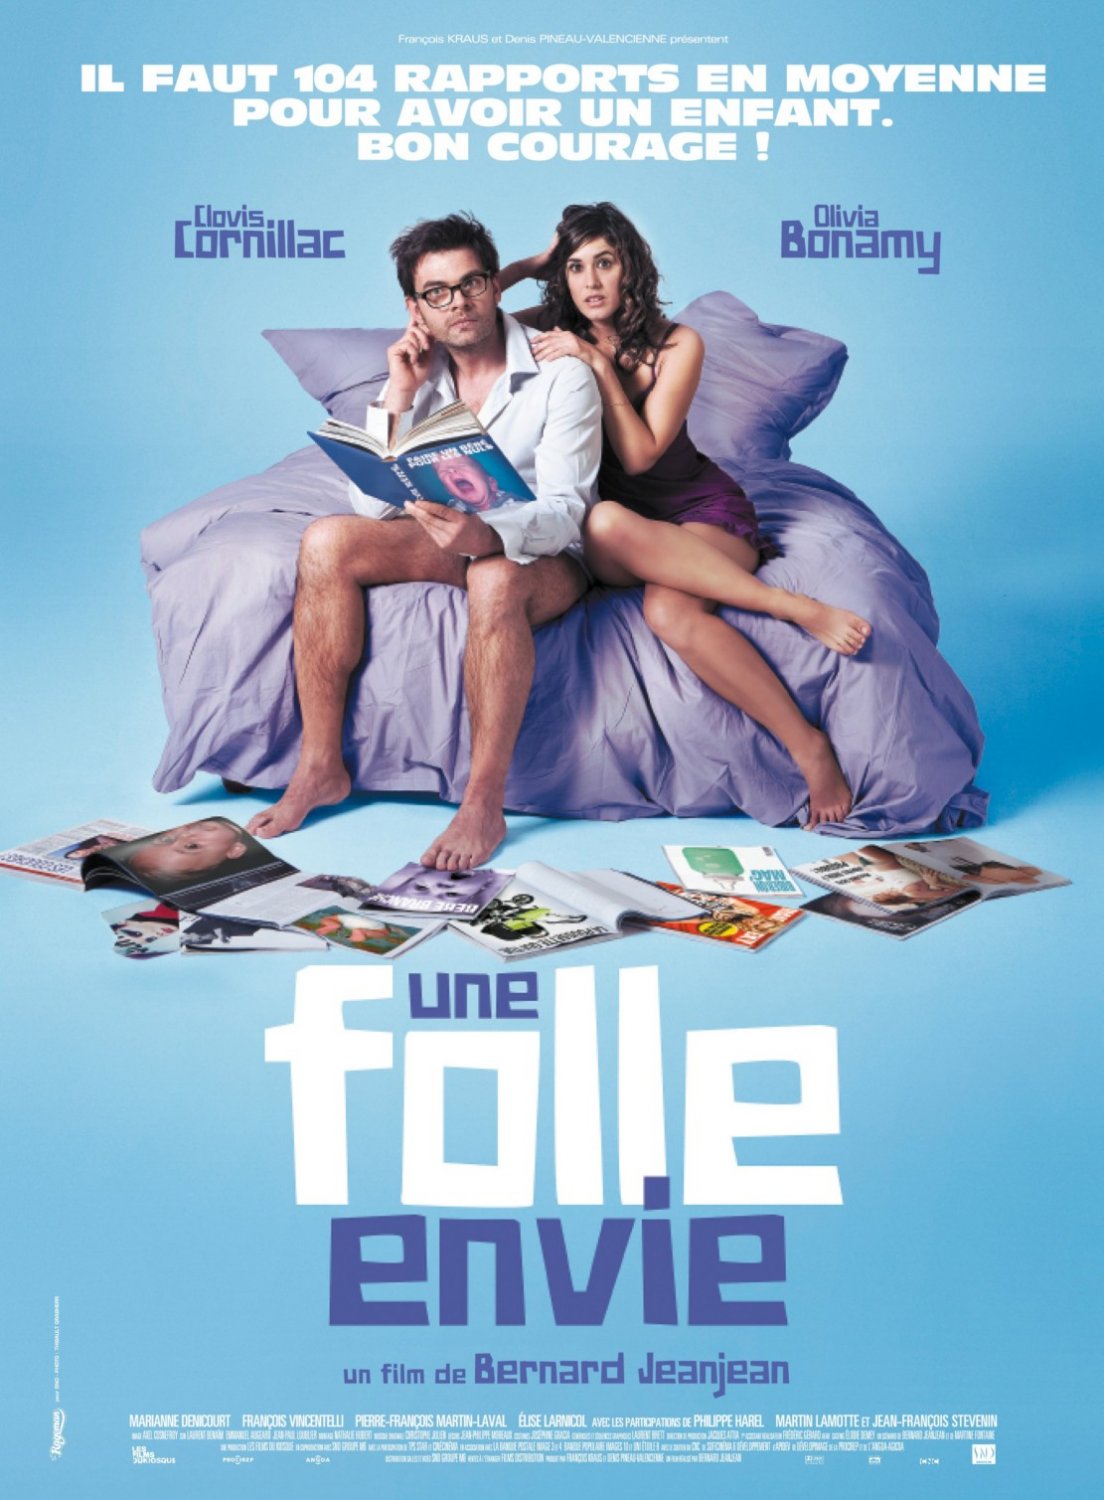 Extra Large Movie Poster Image for Une folle envie 